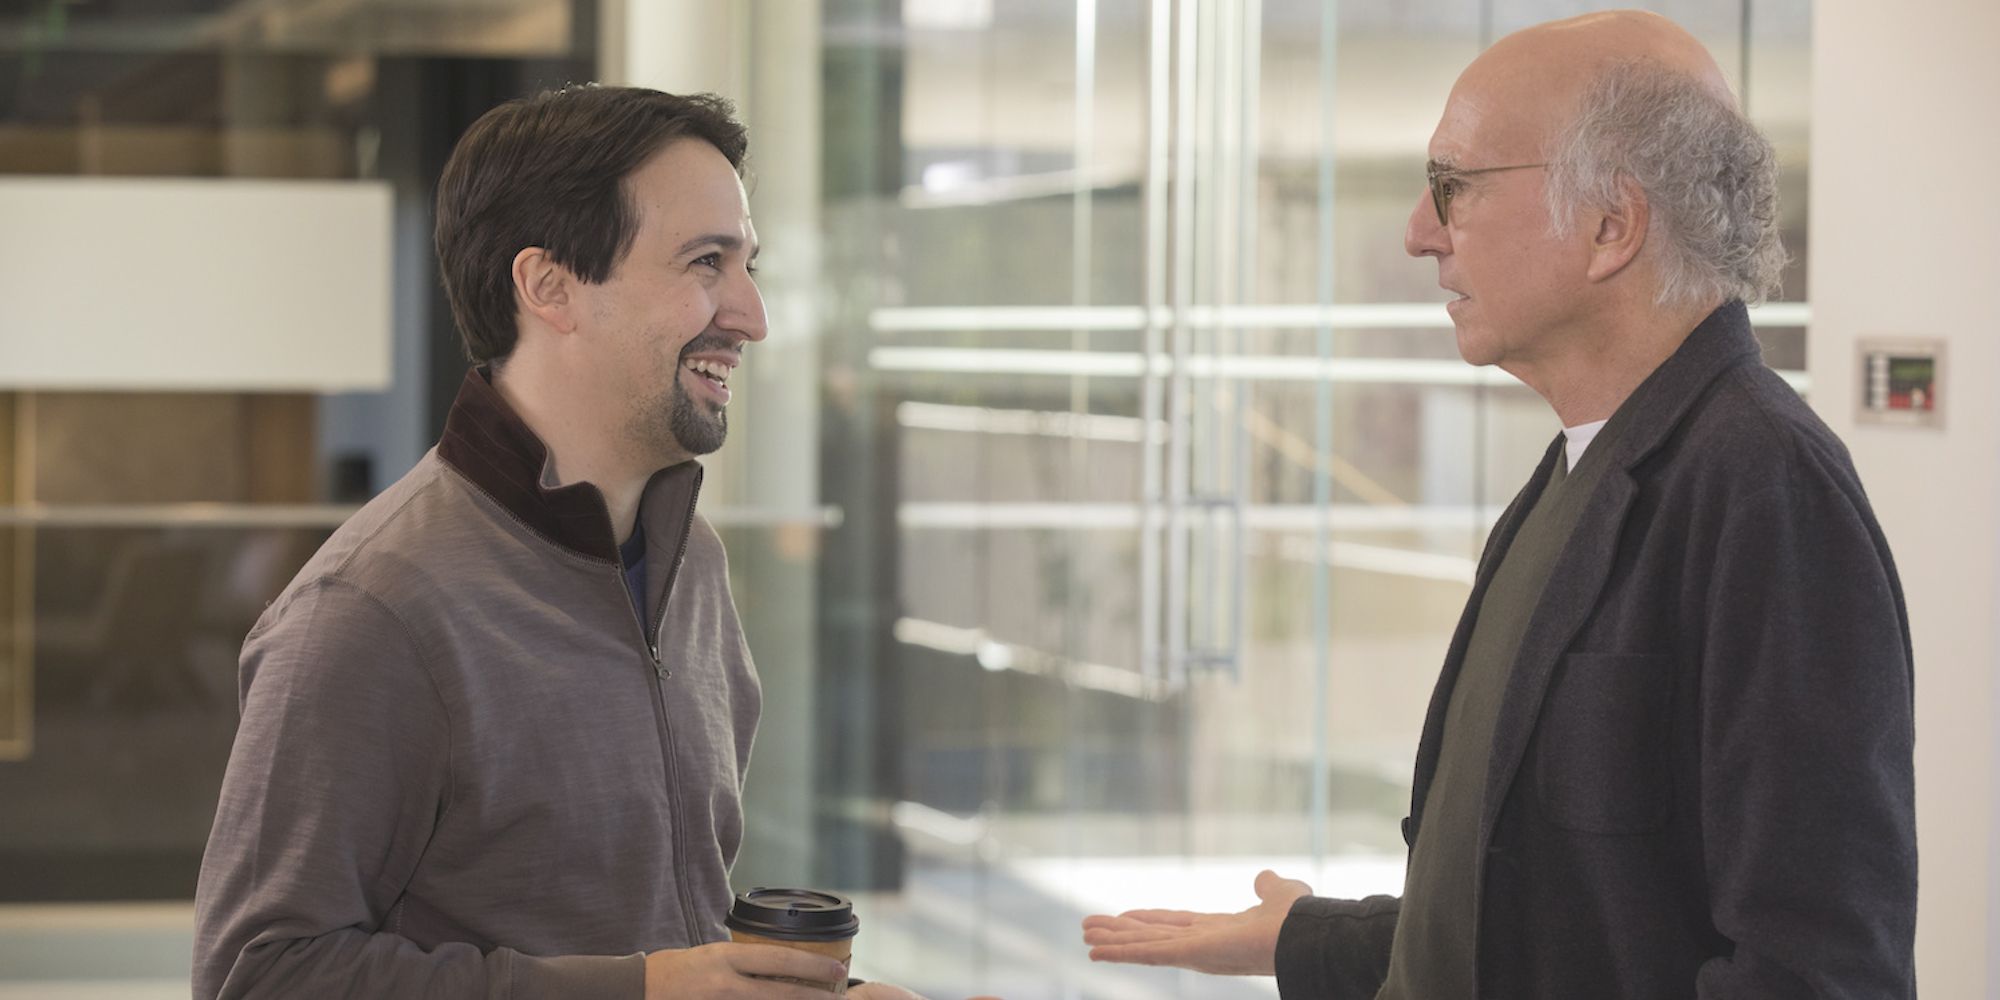 Lin Manuel Miranda and Larry David in 'Curb Your Enthusiasm'